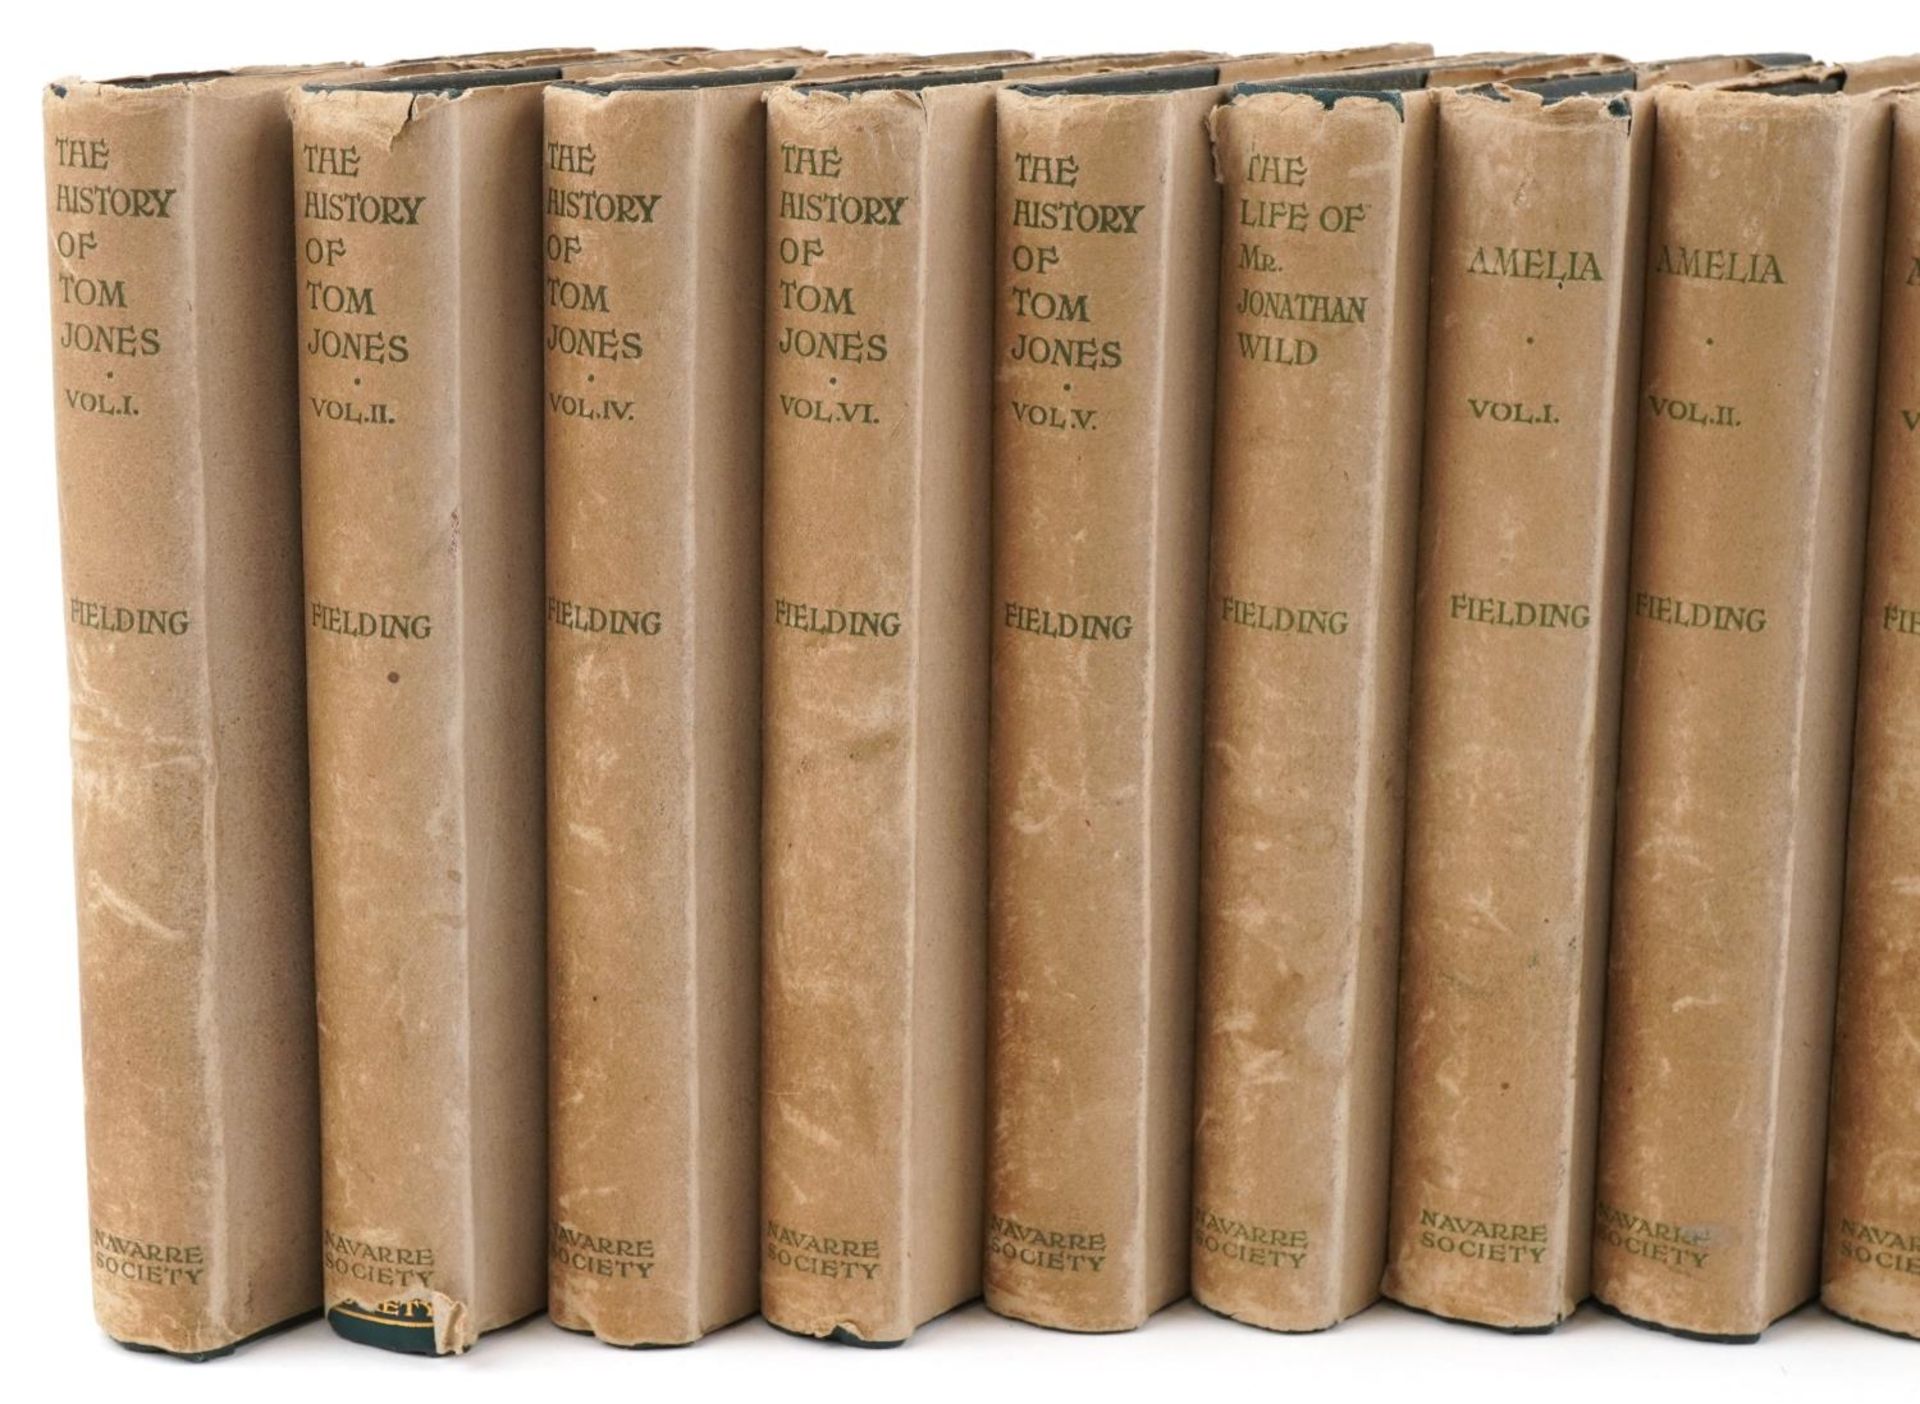 The Works of Henry Fielding, set of twelve Navarre Society hardback books with dust jackets - Image 3 of 10